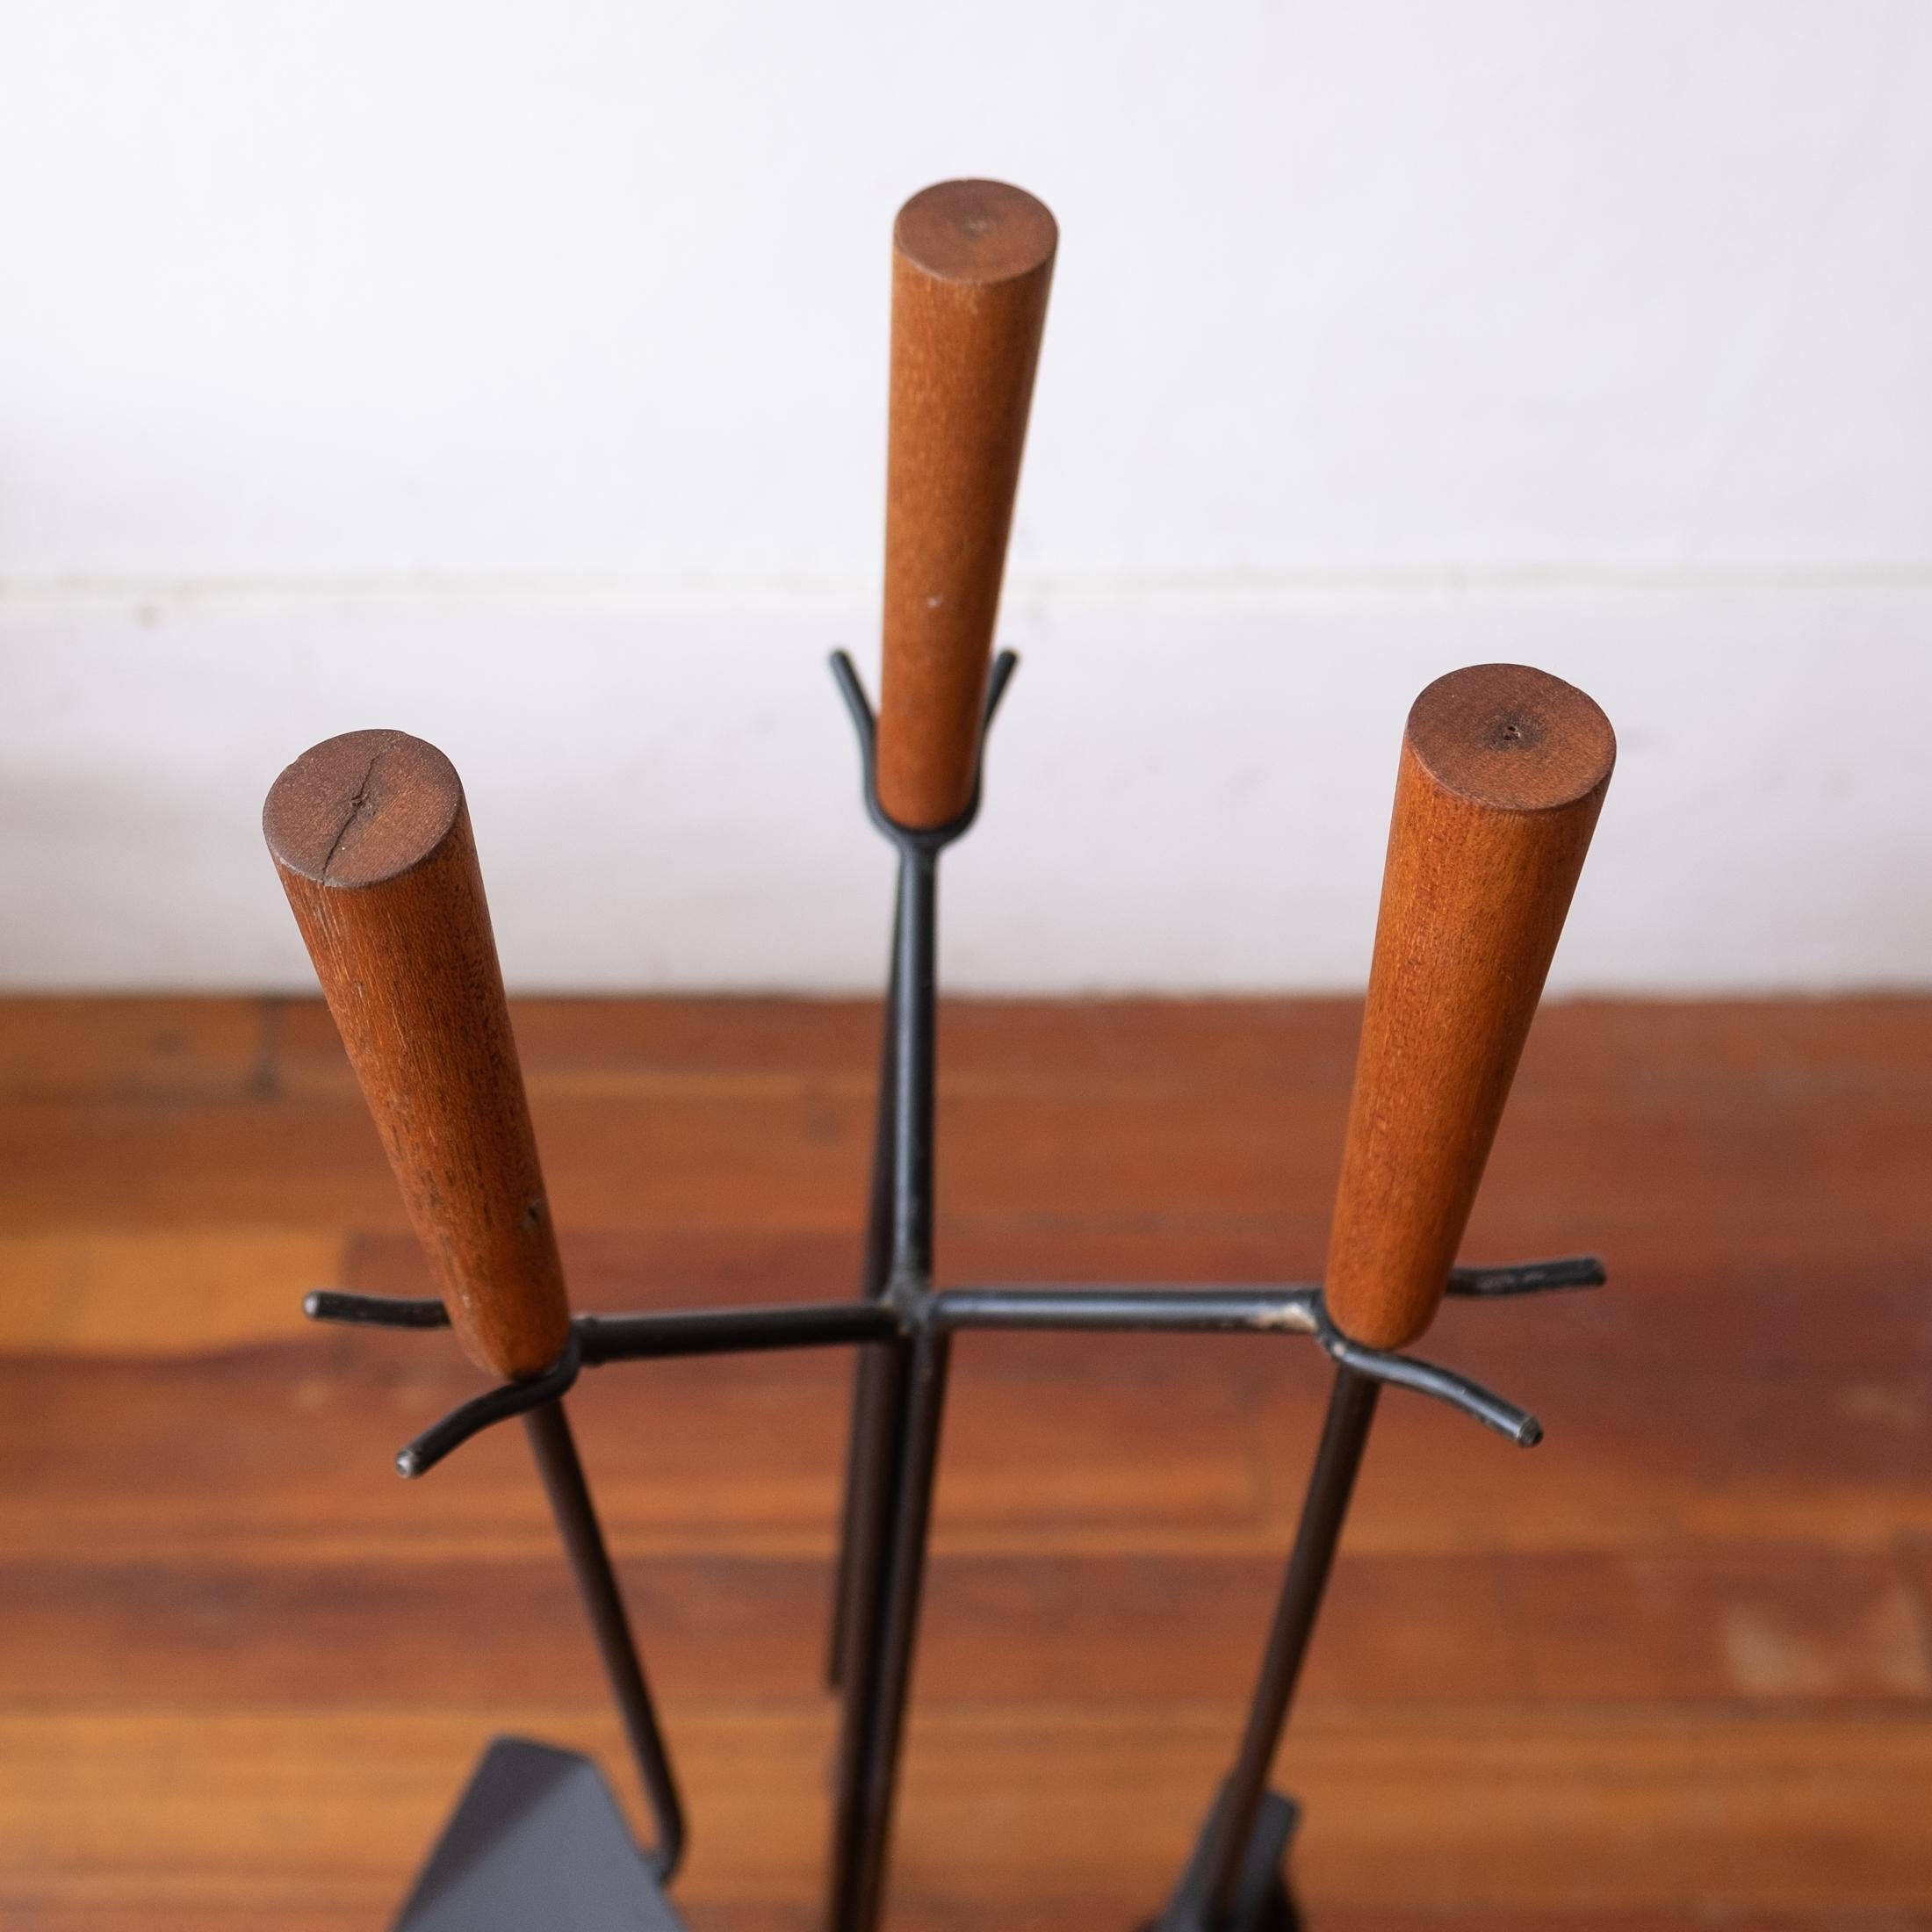 Modernist Midcentury Iron and Wood Fireplace Tool Set 6